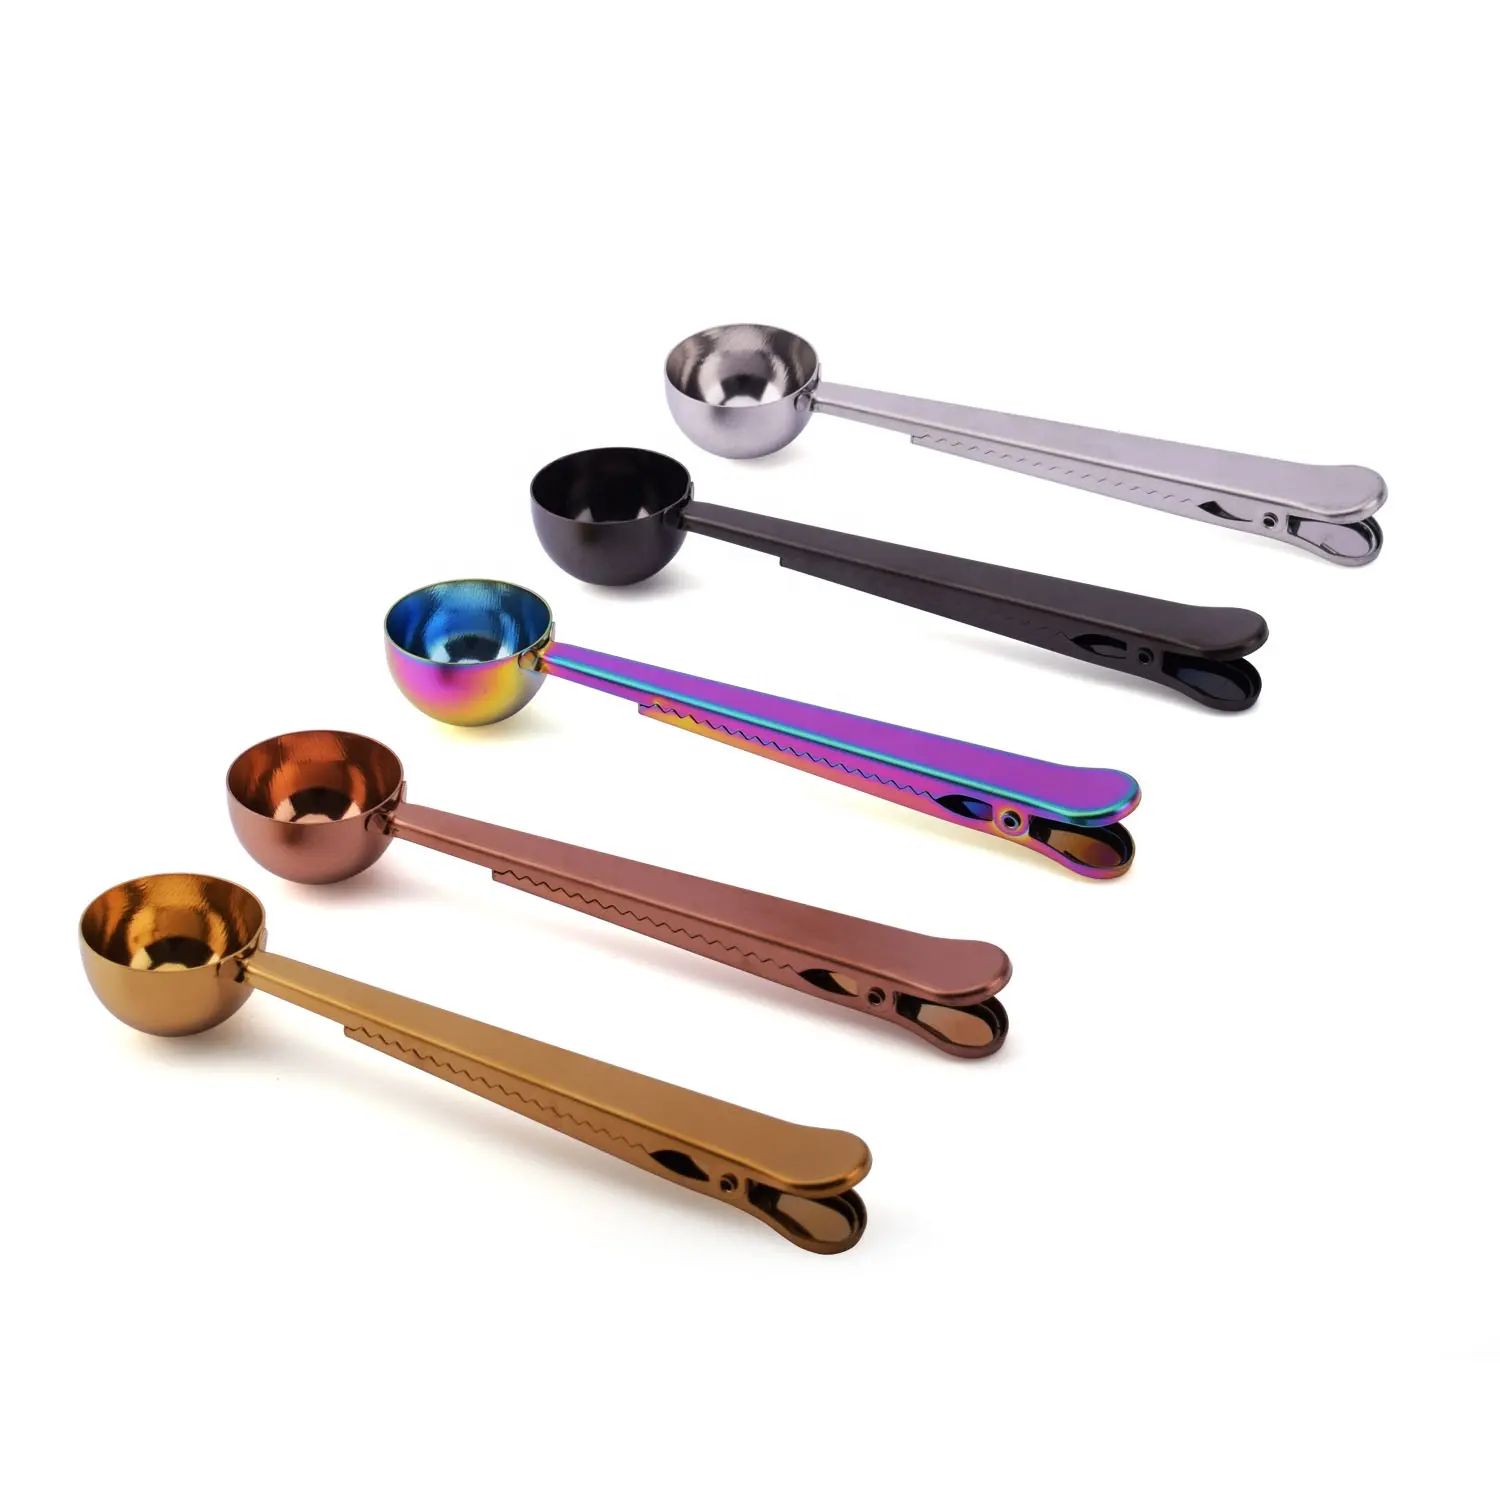 Multifunctional Serve Stainless Steel Tea Spoon with Integrated Bag Clip